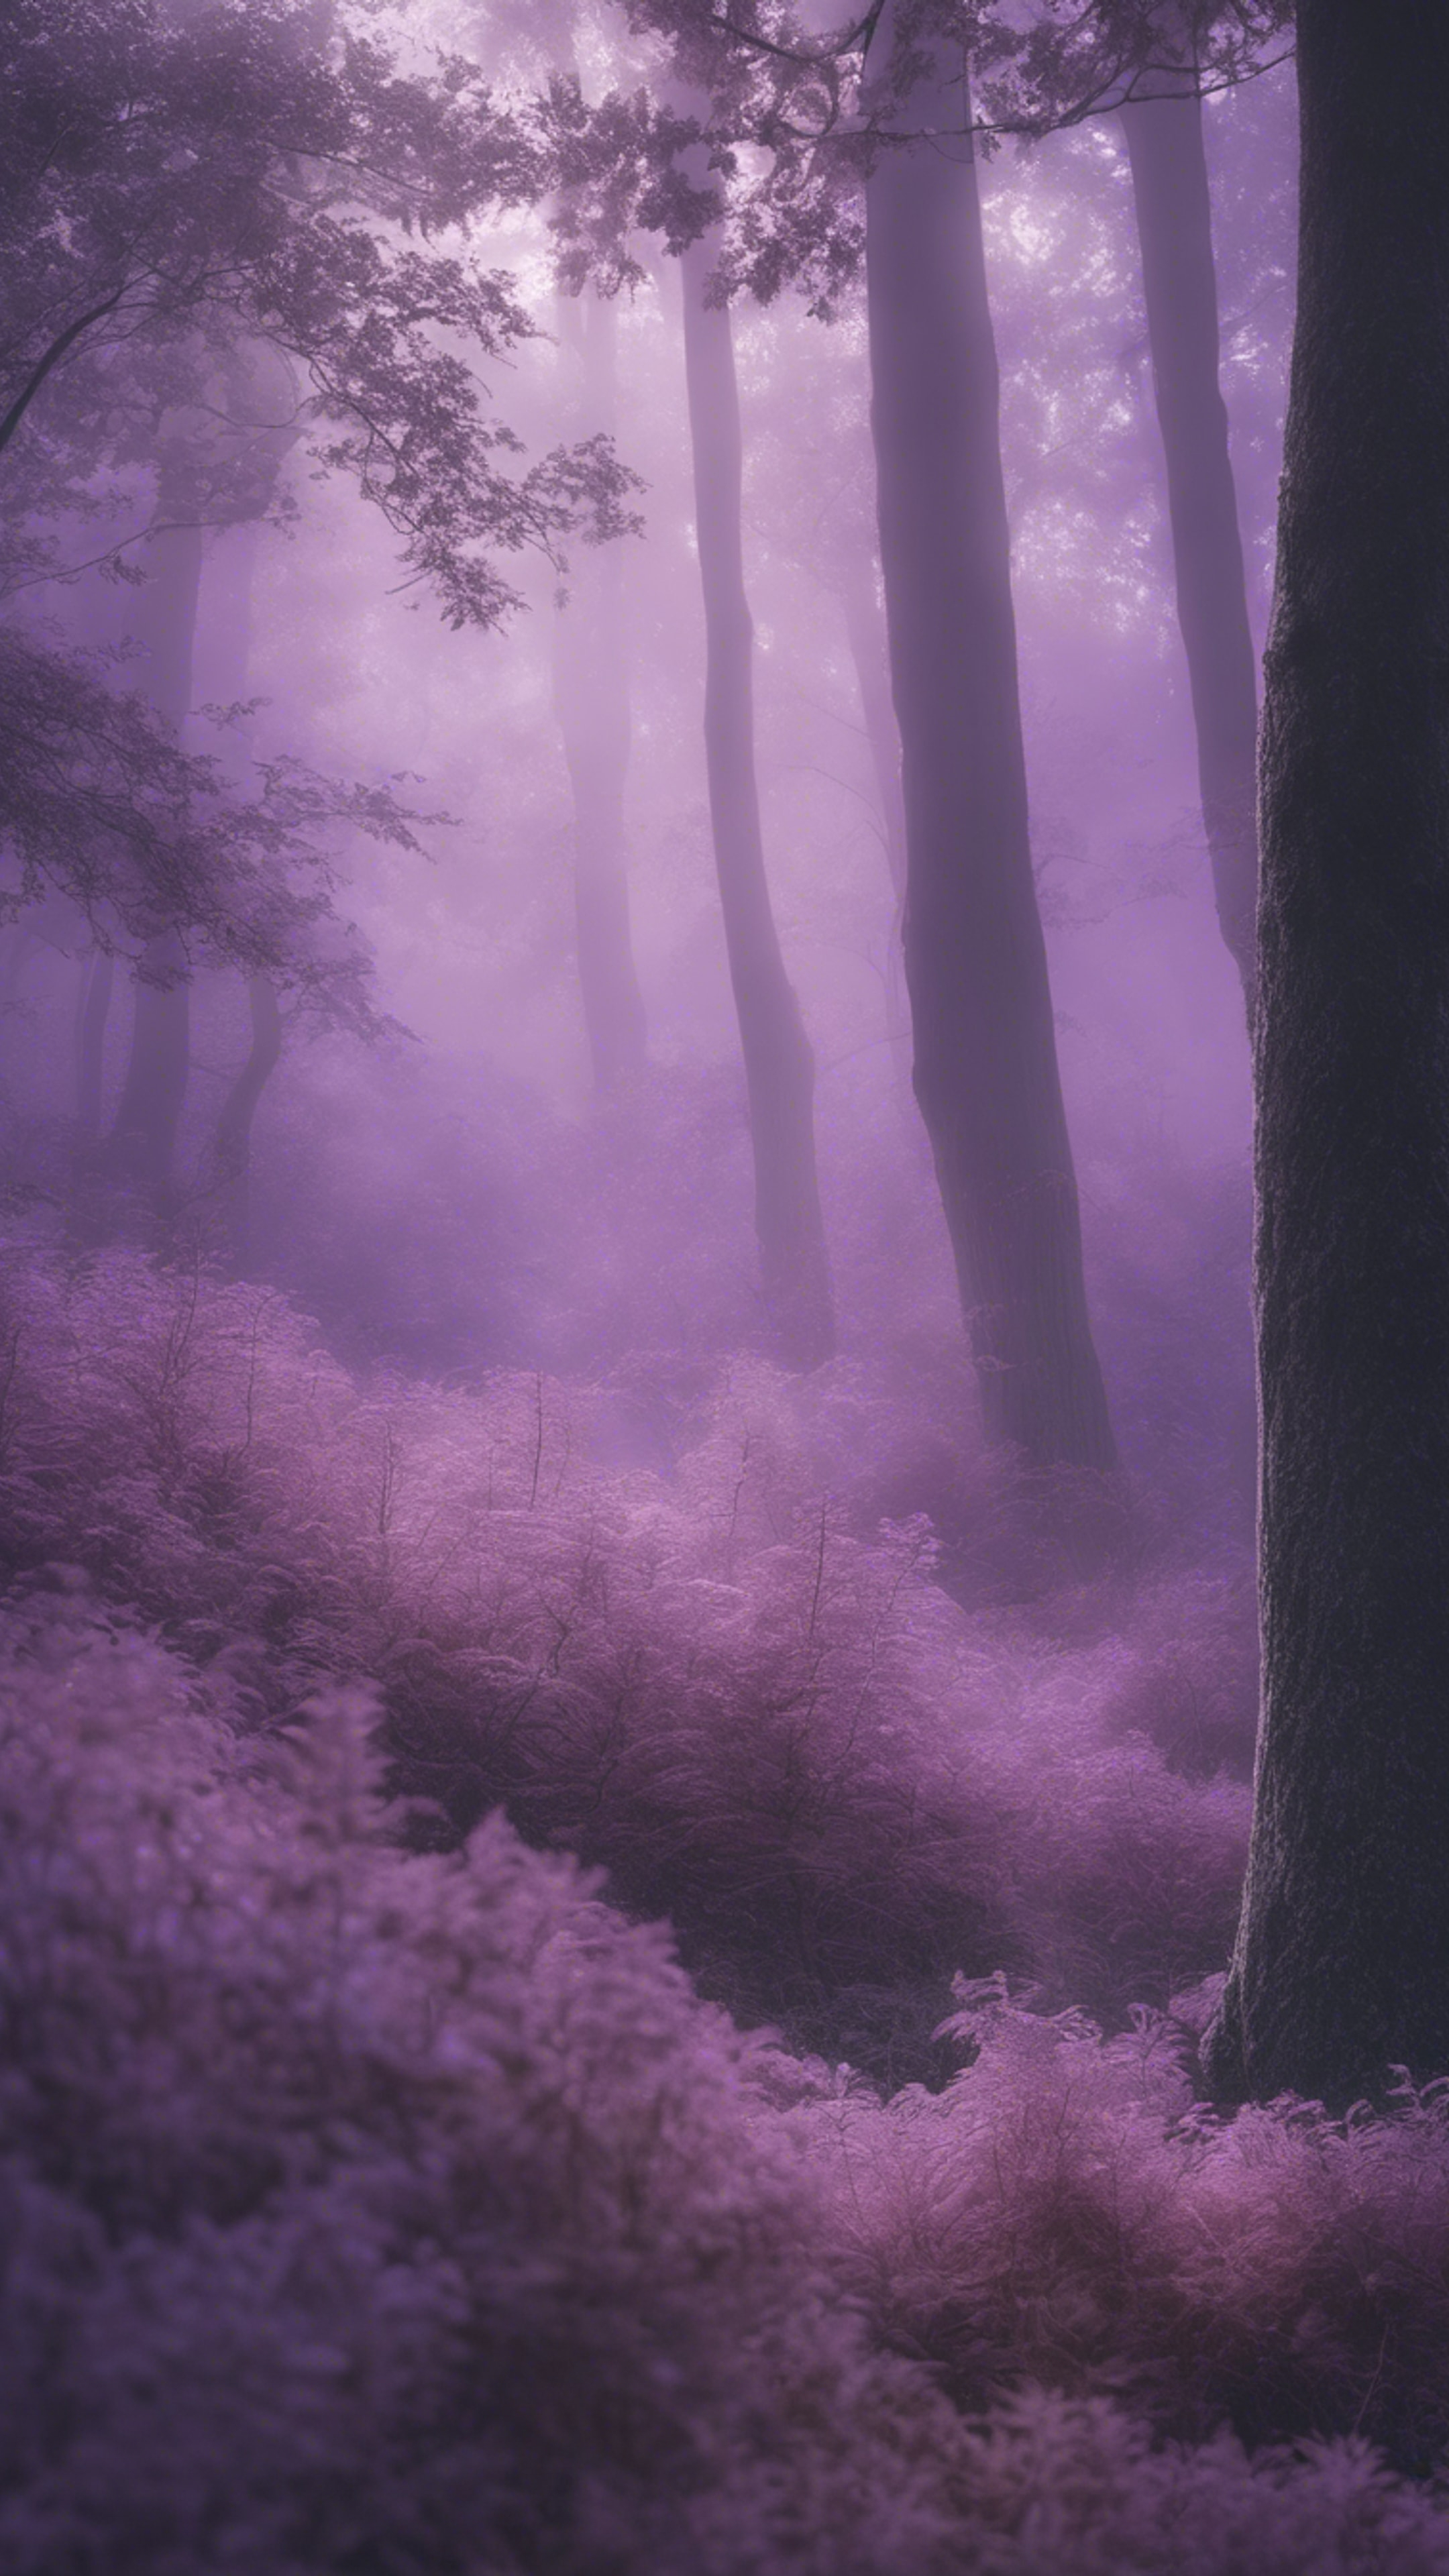 Ethereal scene of a tranquil forest bowed under a silky layer of light purple fog. Tapéta[581b7126aa2a4d368dd8]